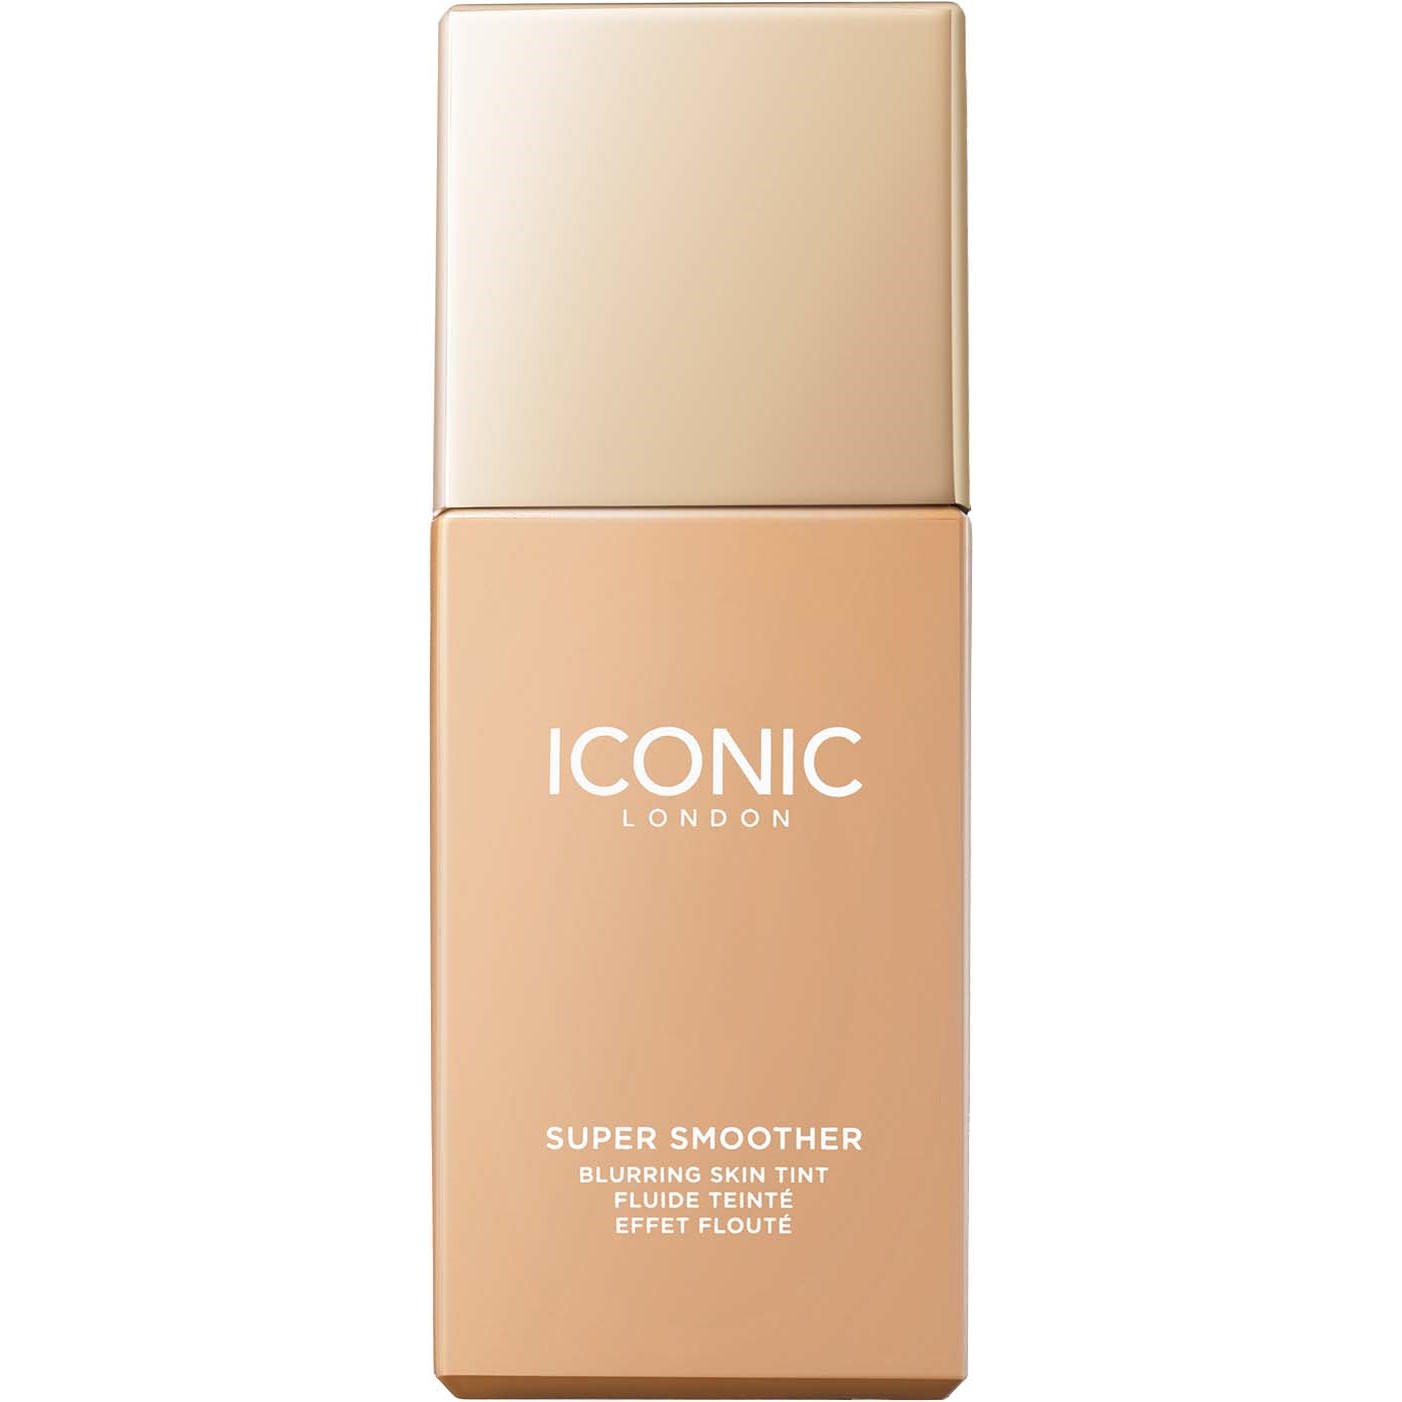 ICONIC London Super Smoother Blurring Skin Tint Neutral Light